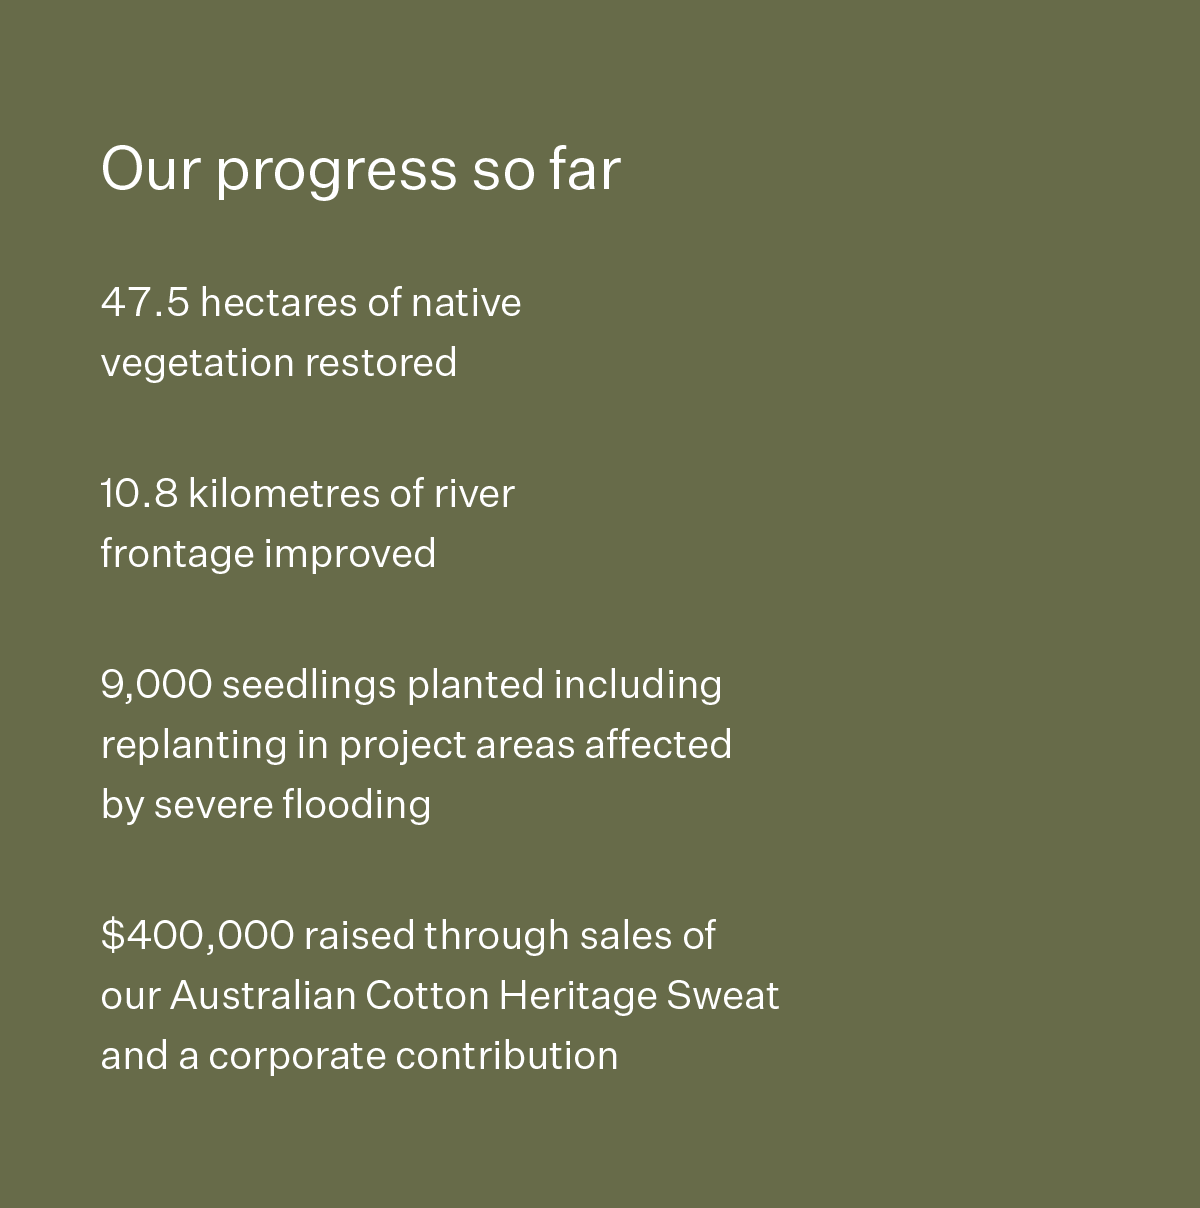 47.5 hectares of native vegetation restored | 10.8 kilometres of river frontage improved | 9,000 seedlings planted including replanting in project areas affected by severe flooding | $400,000 raised through sales of our Australian Cotton Heritage Sweat and a corporate contribution